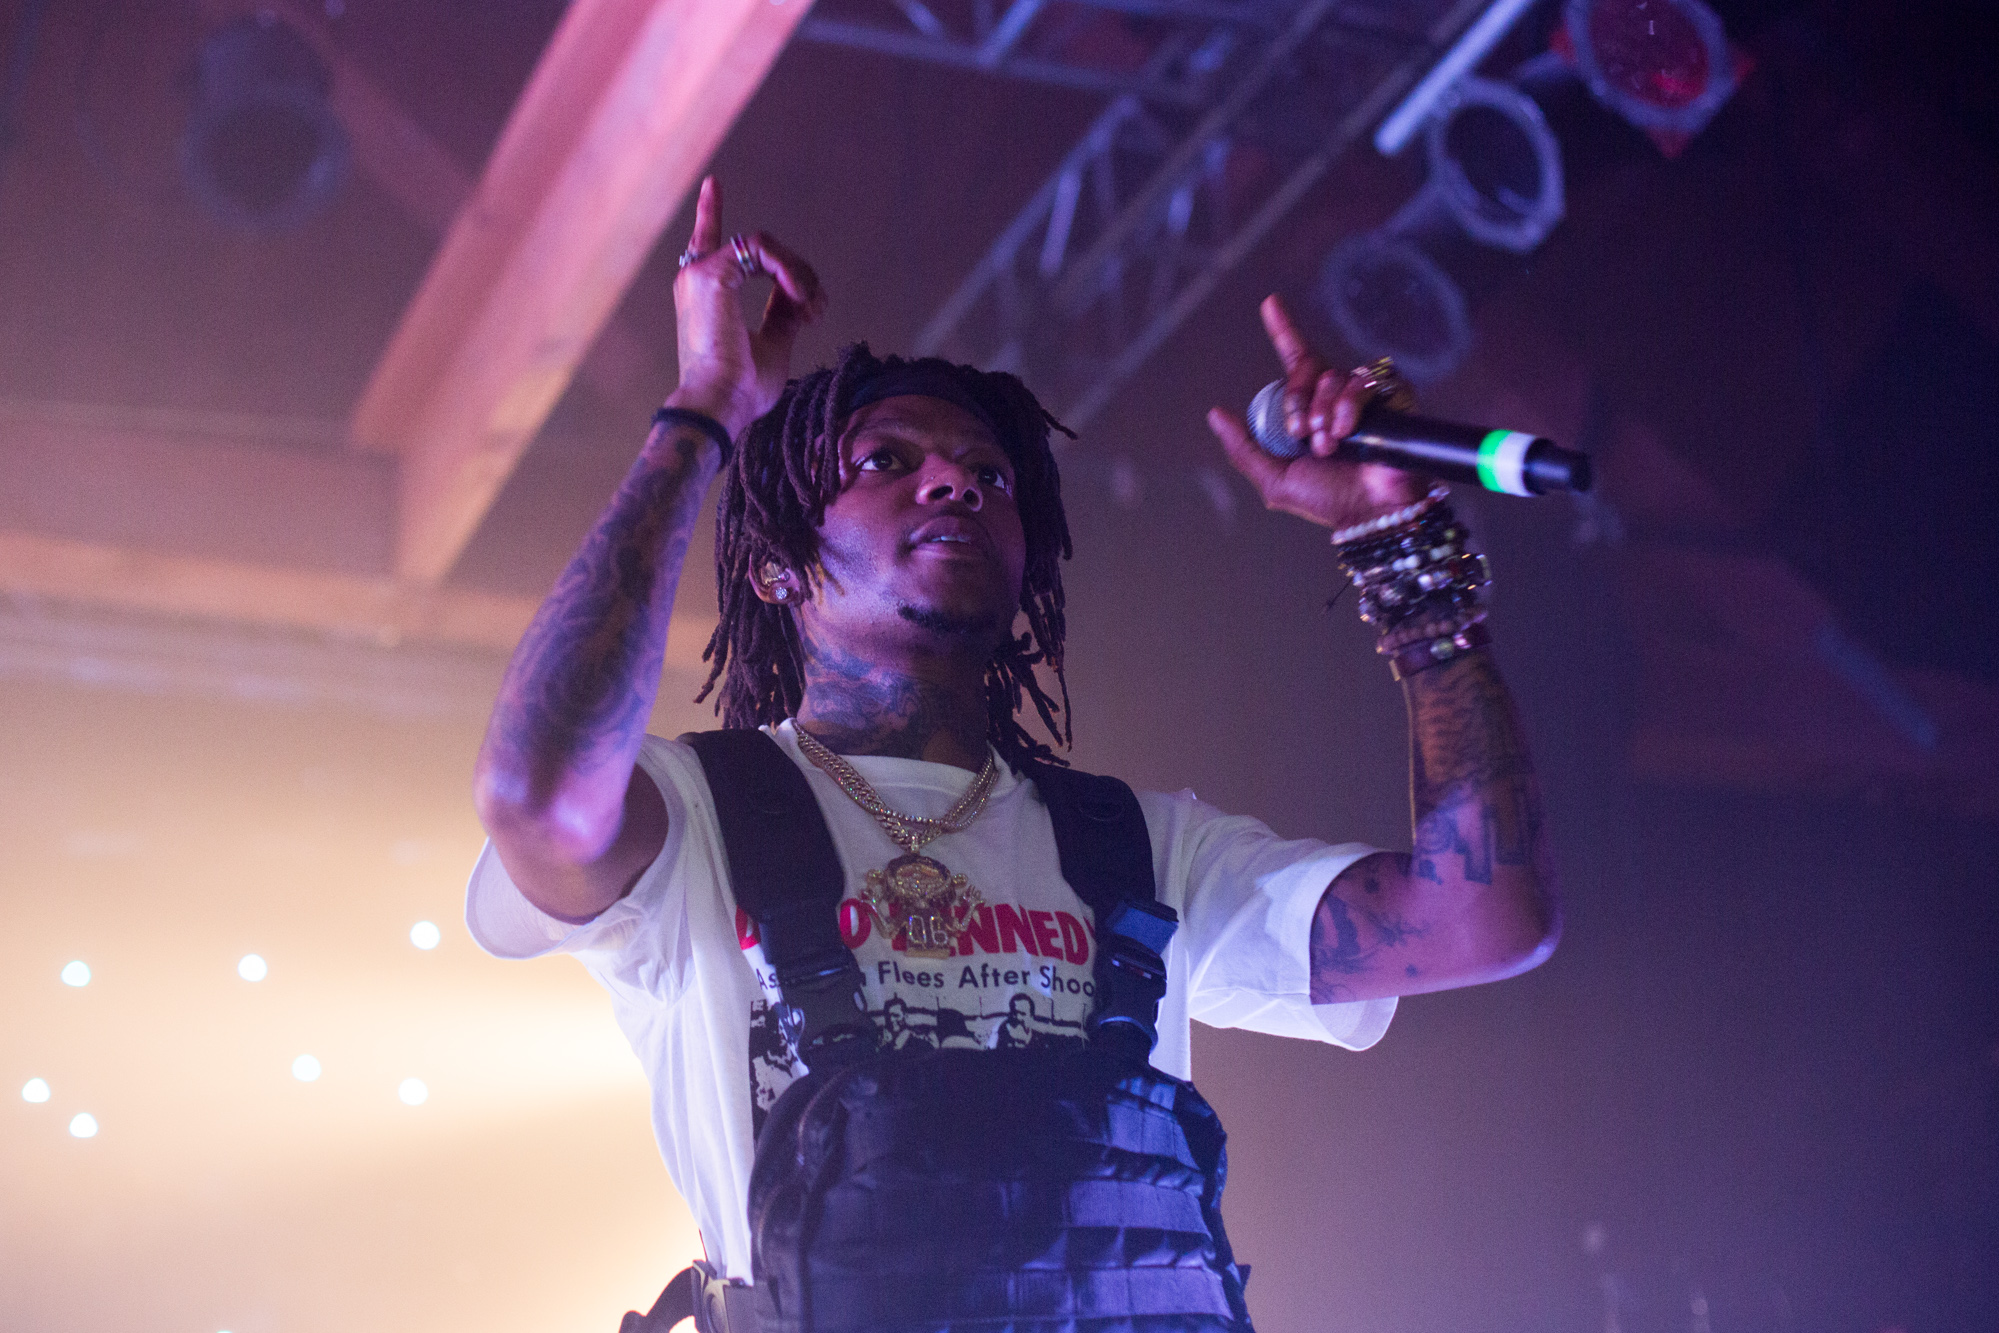 Indulging In Lyricism With J.I.D And Saba